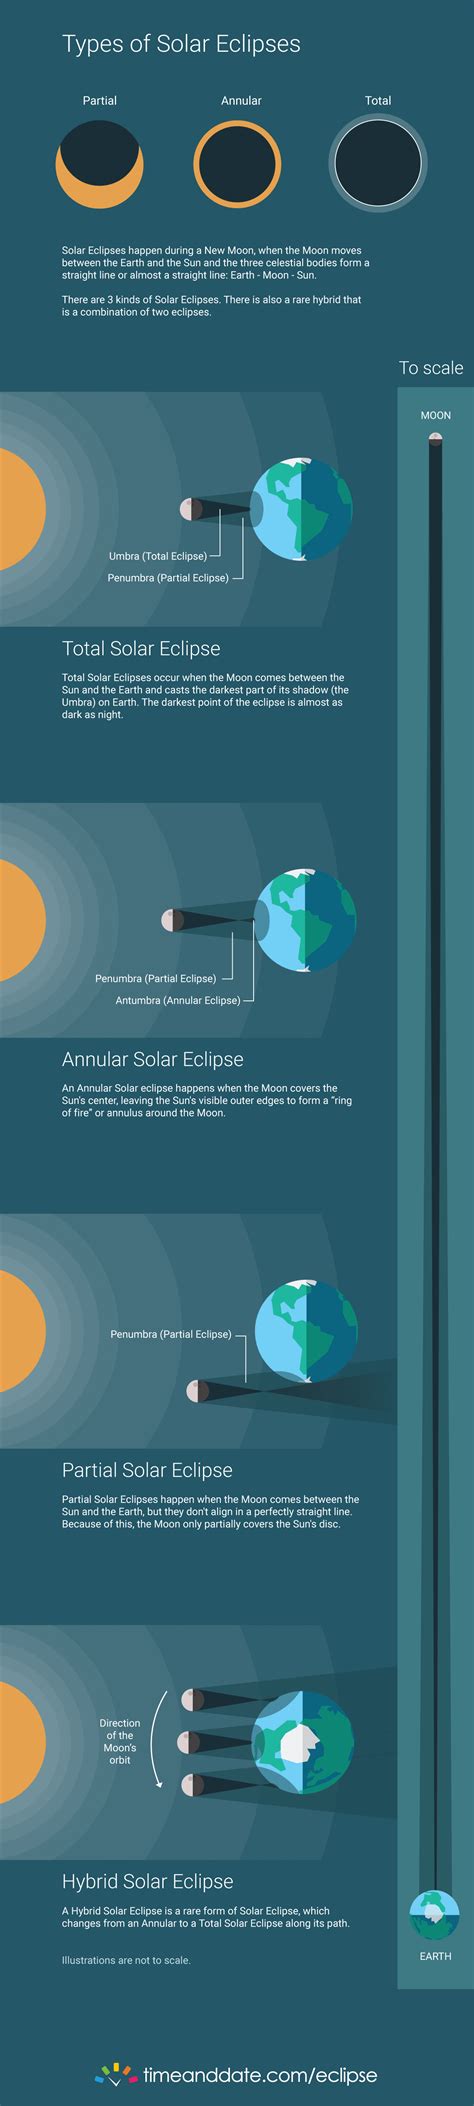 Types Of Solar Eclipse Infographic